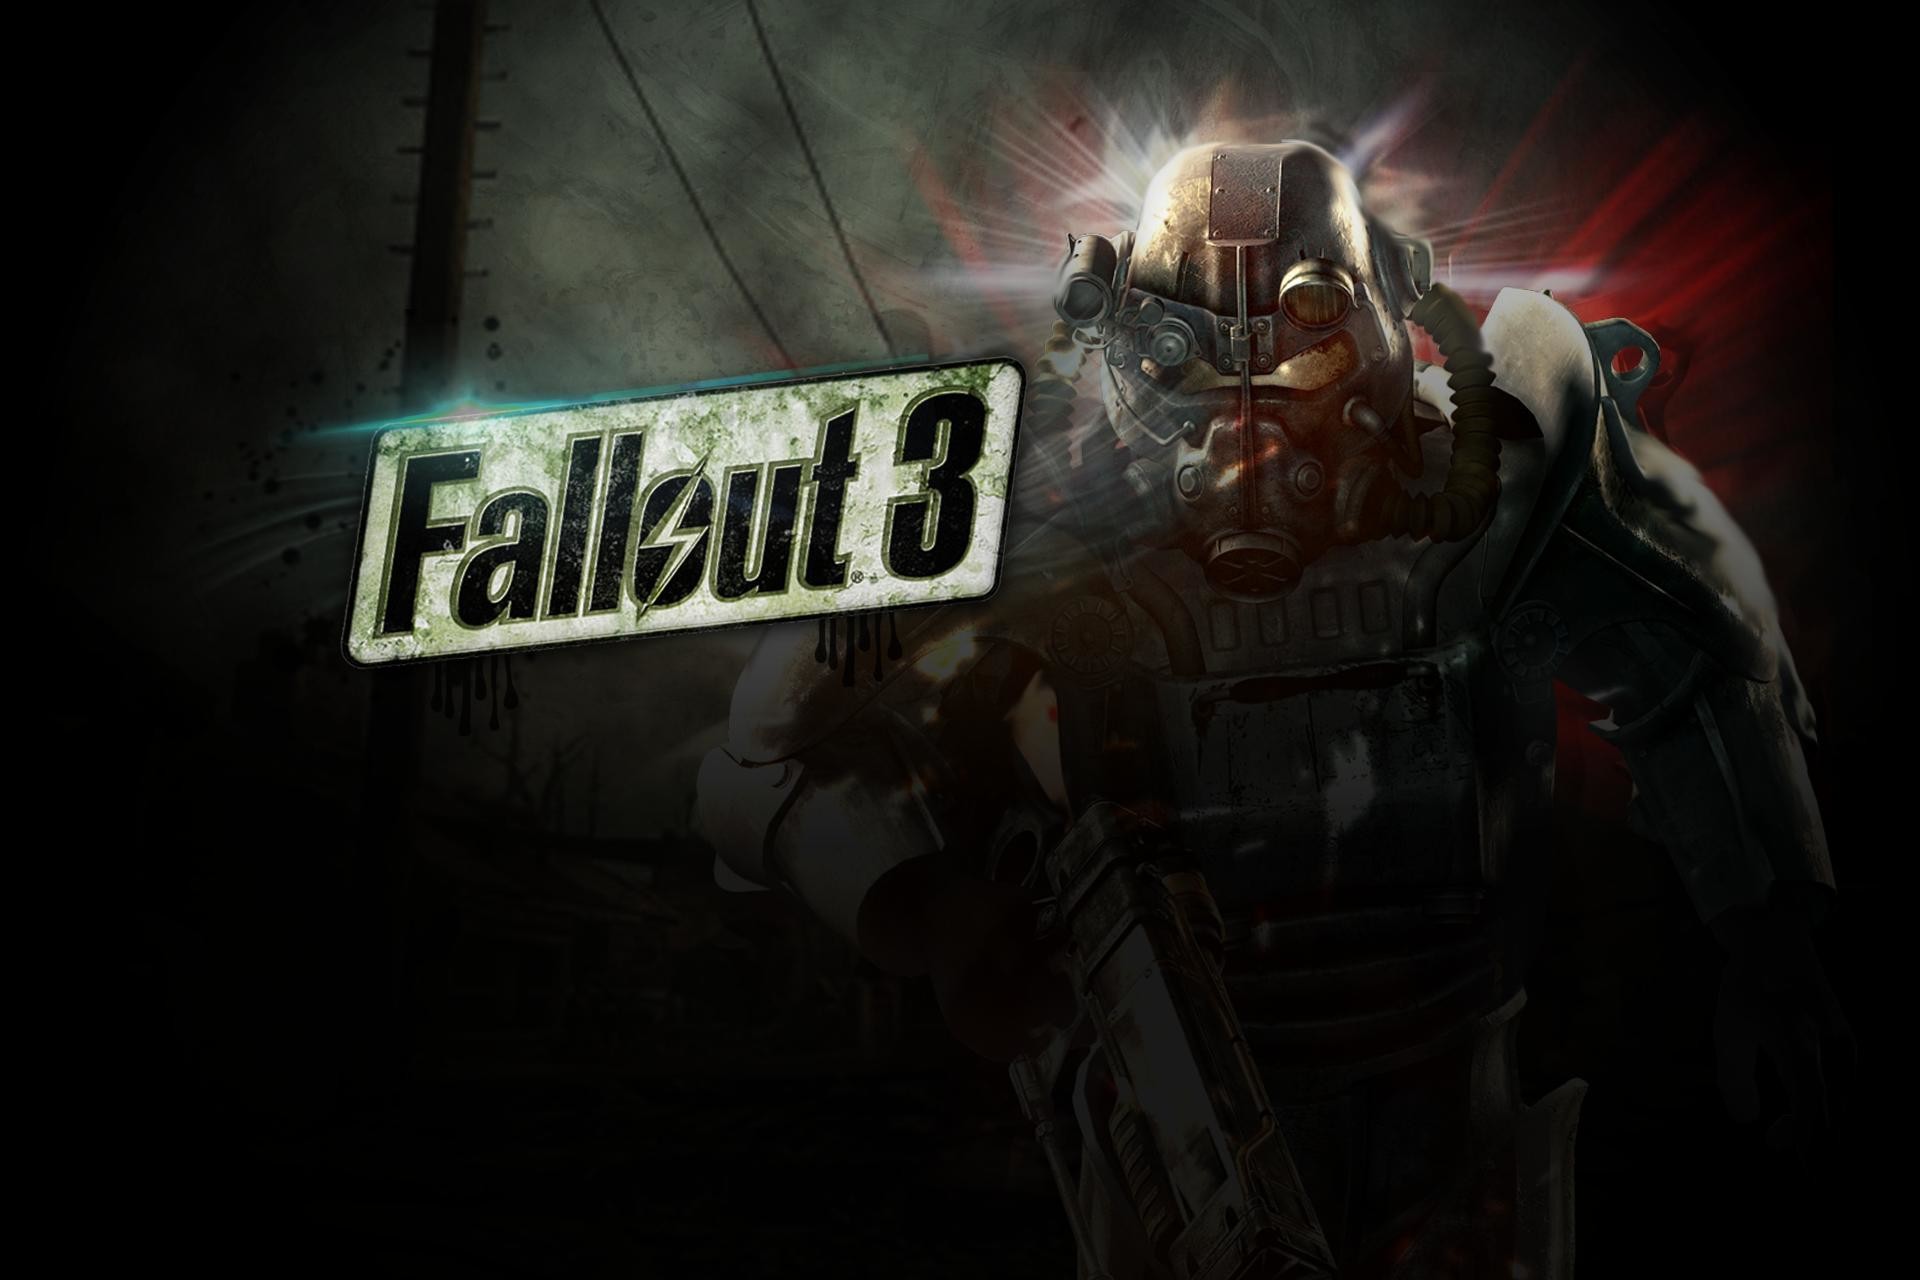 1920x1280 Fallout 3 Backgrounds - Wallpaper Cave